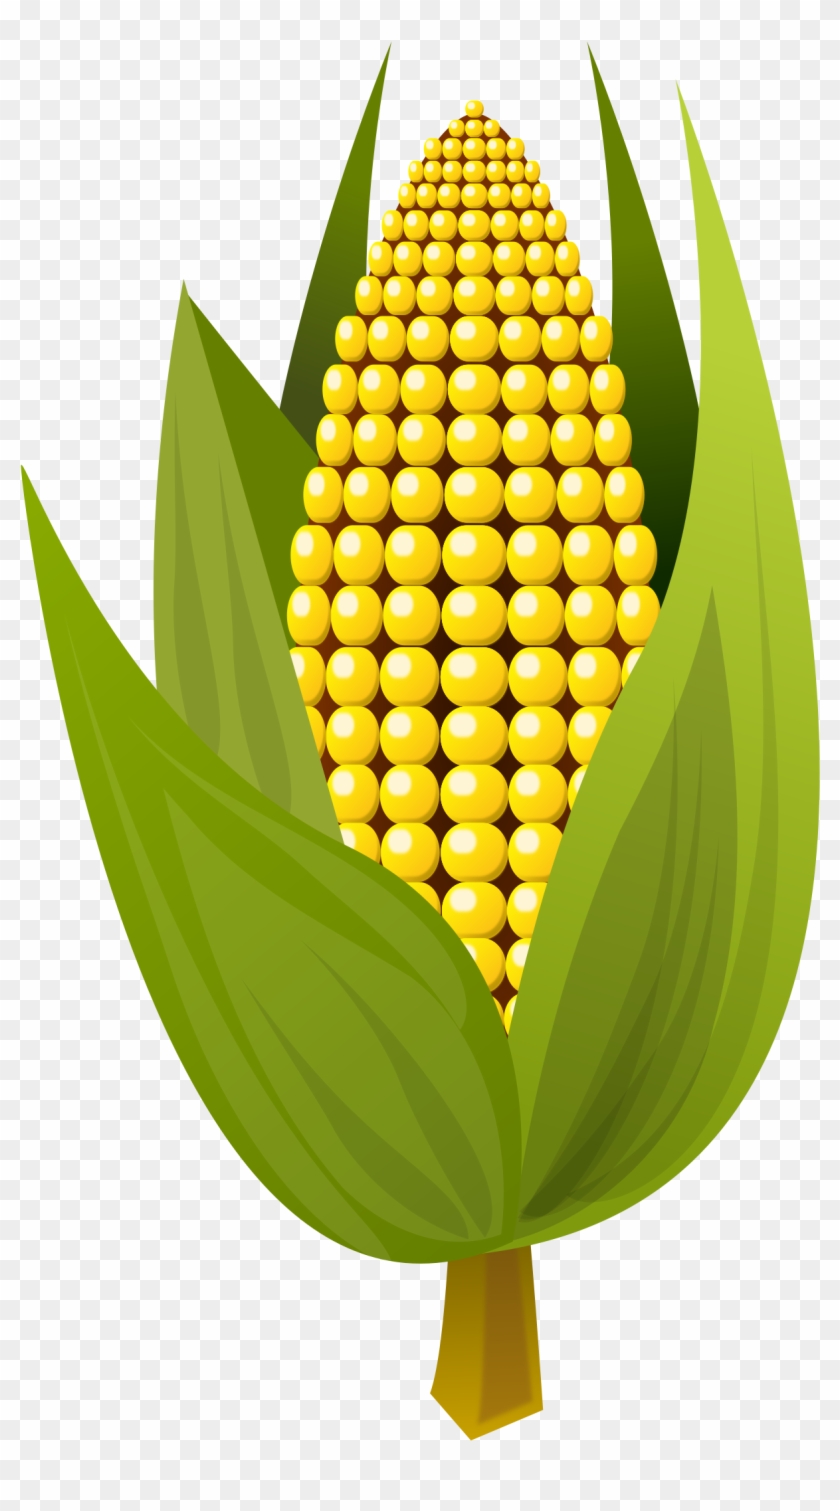 Corn Vector Clipart Image Small Corn Clipart Hd Png Download 1697x2400 9462 Pngfind